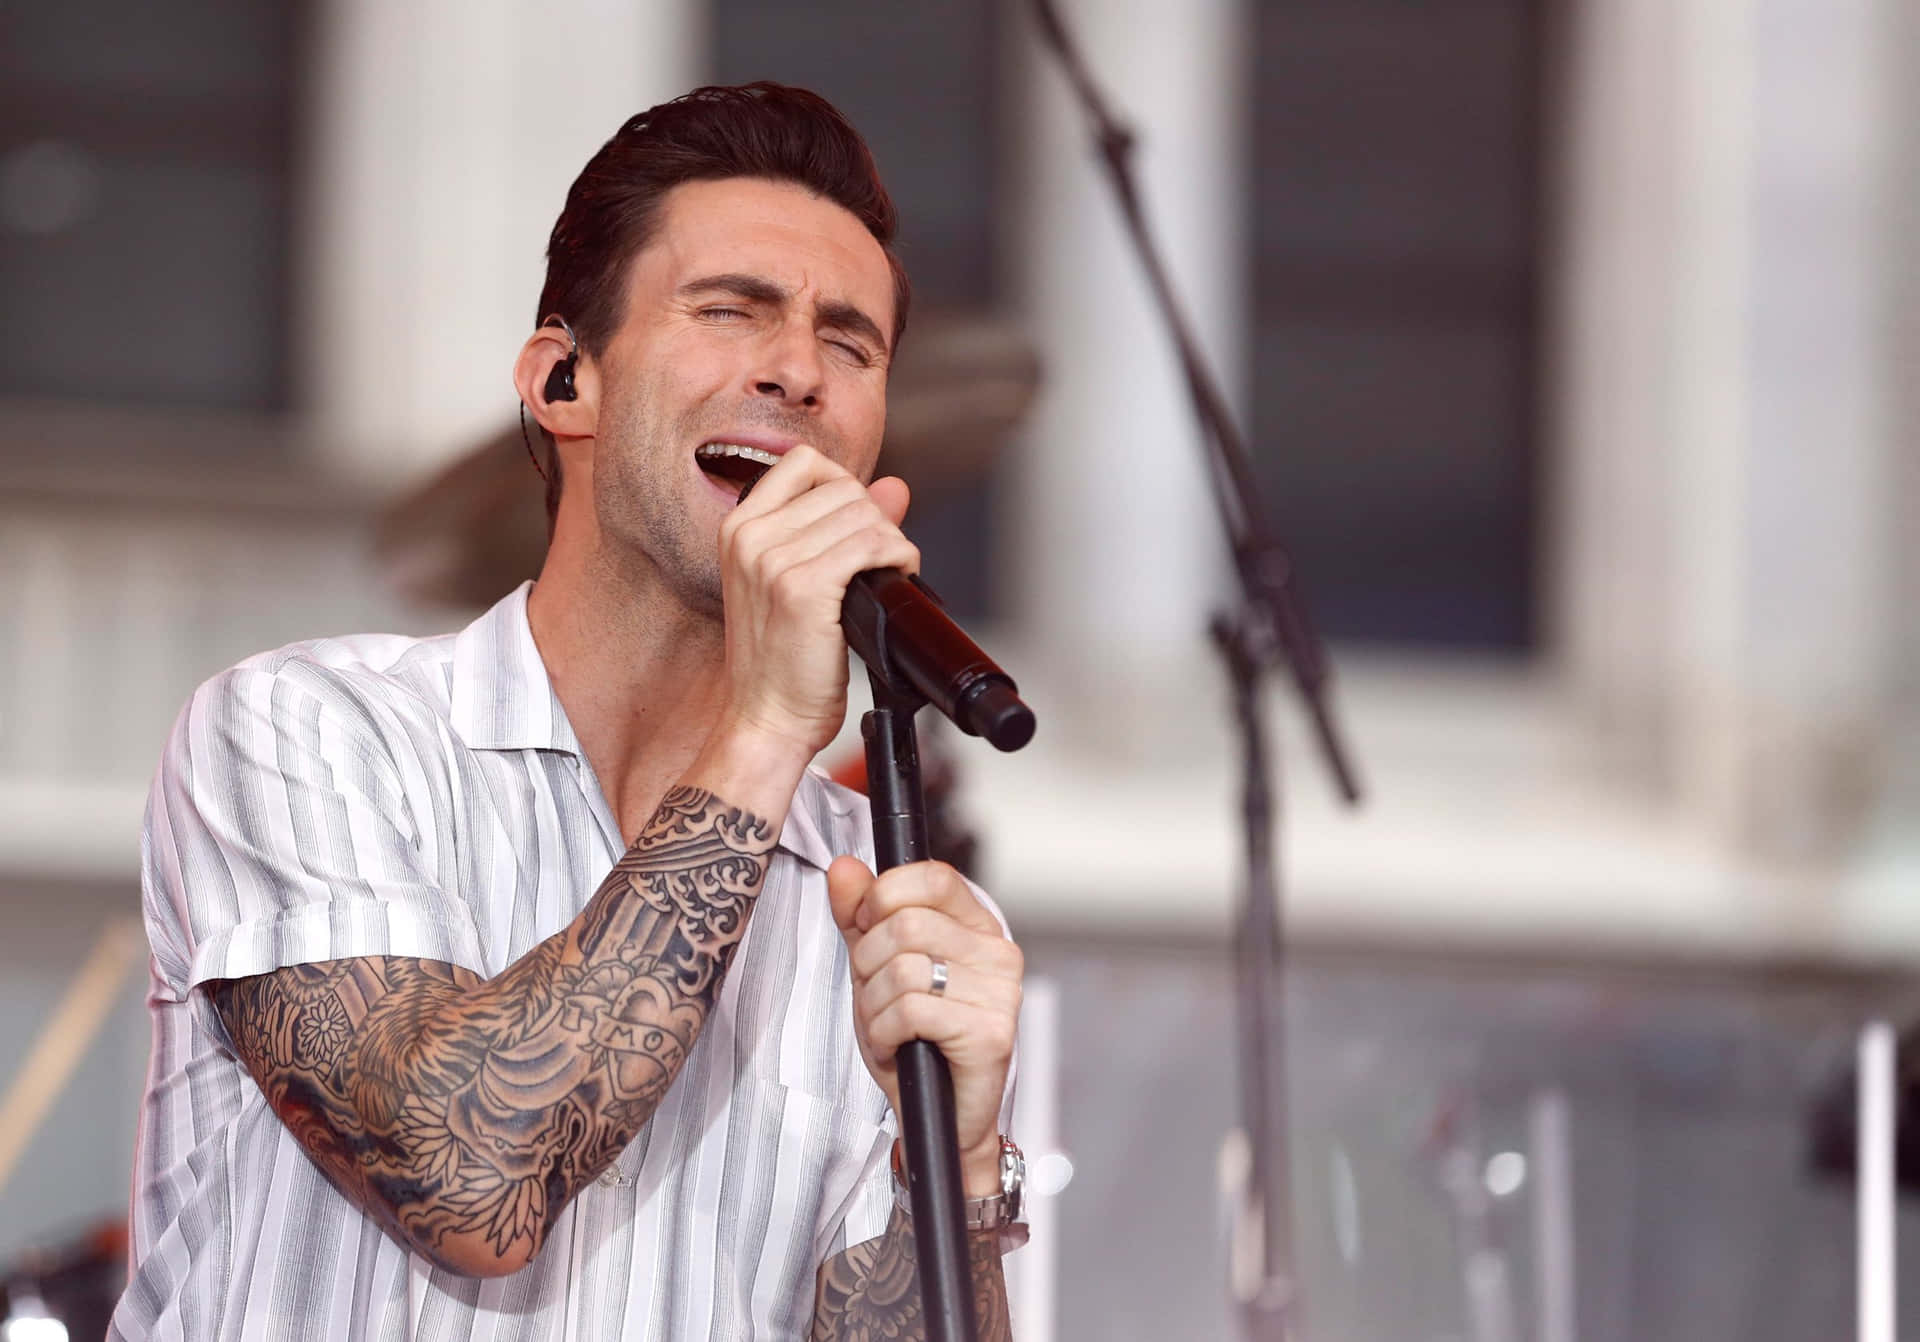 A Man With Tattoos Singing Into A Microphone